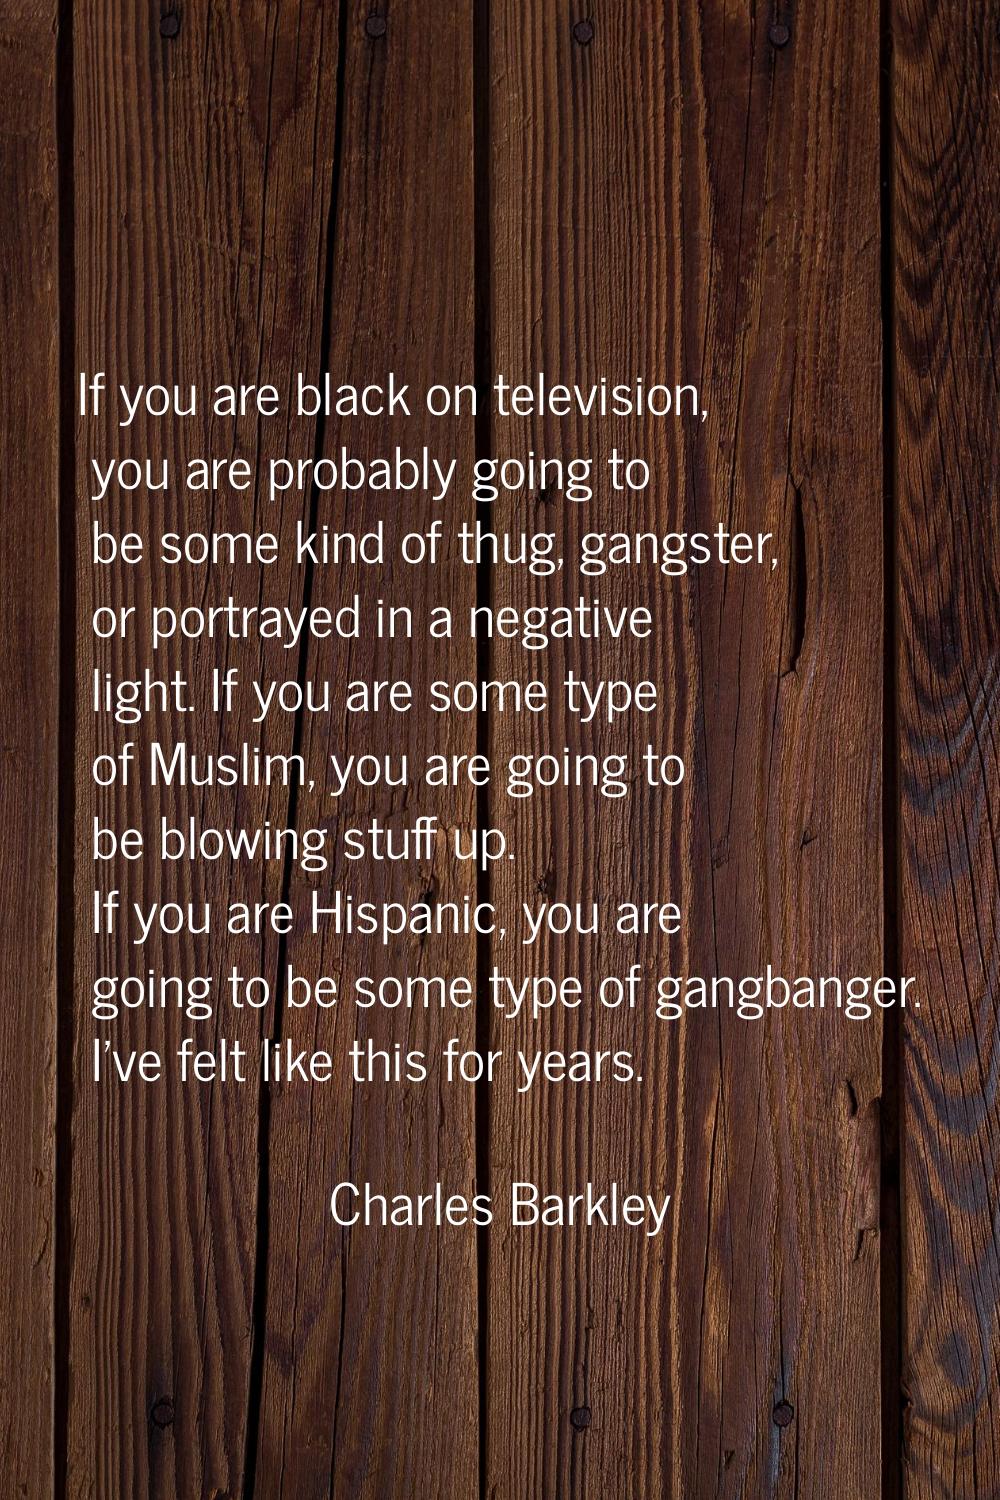 If you are black on television, you are probably going to be some kind of thug, gangster, or portra